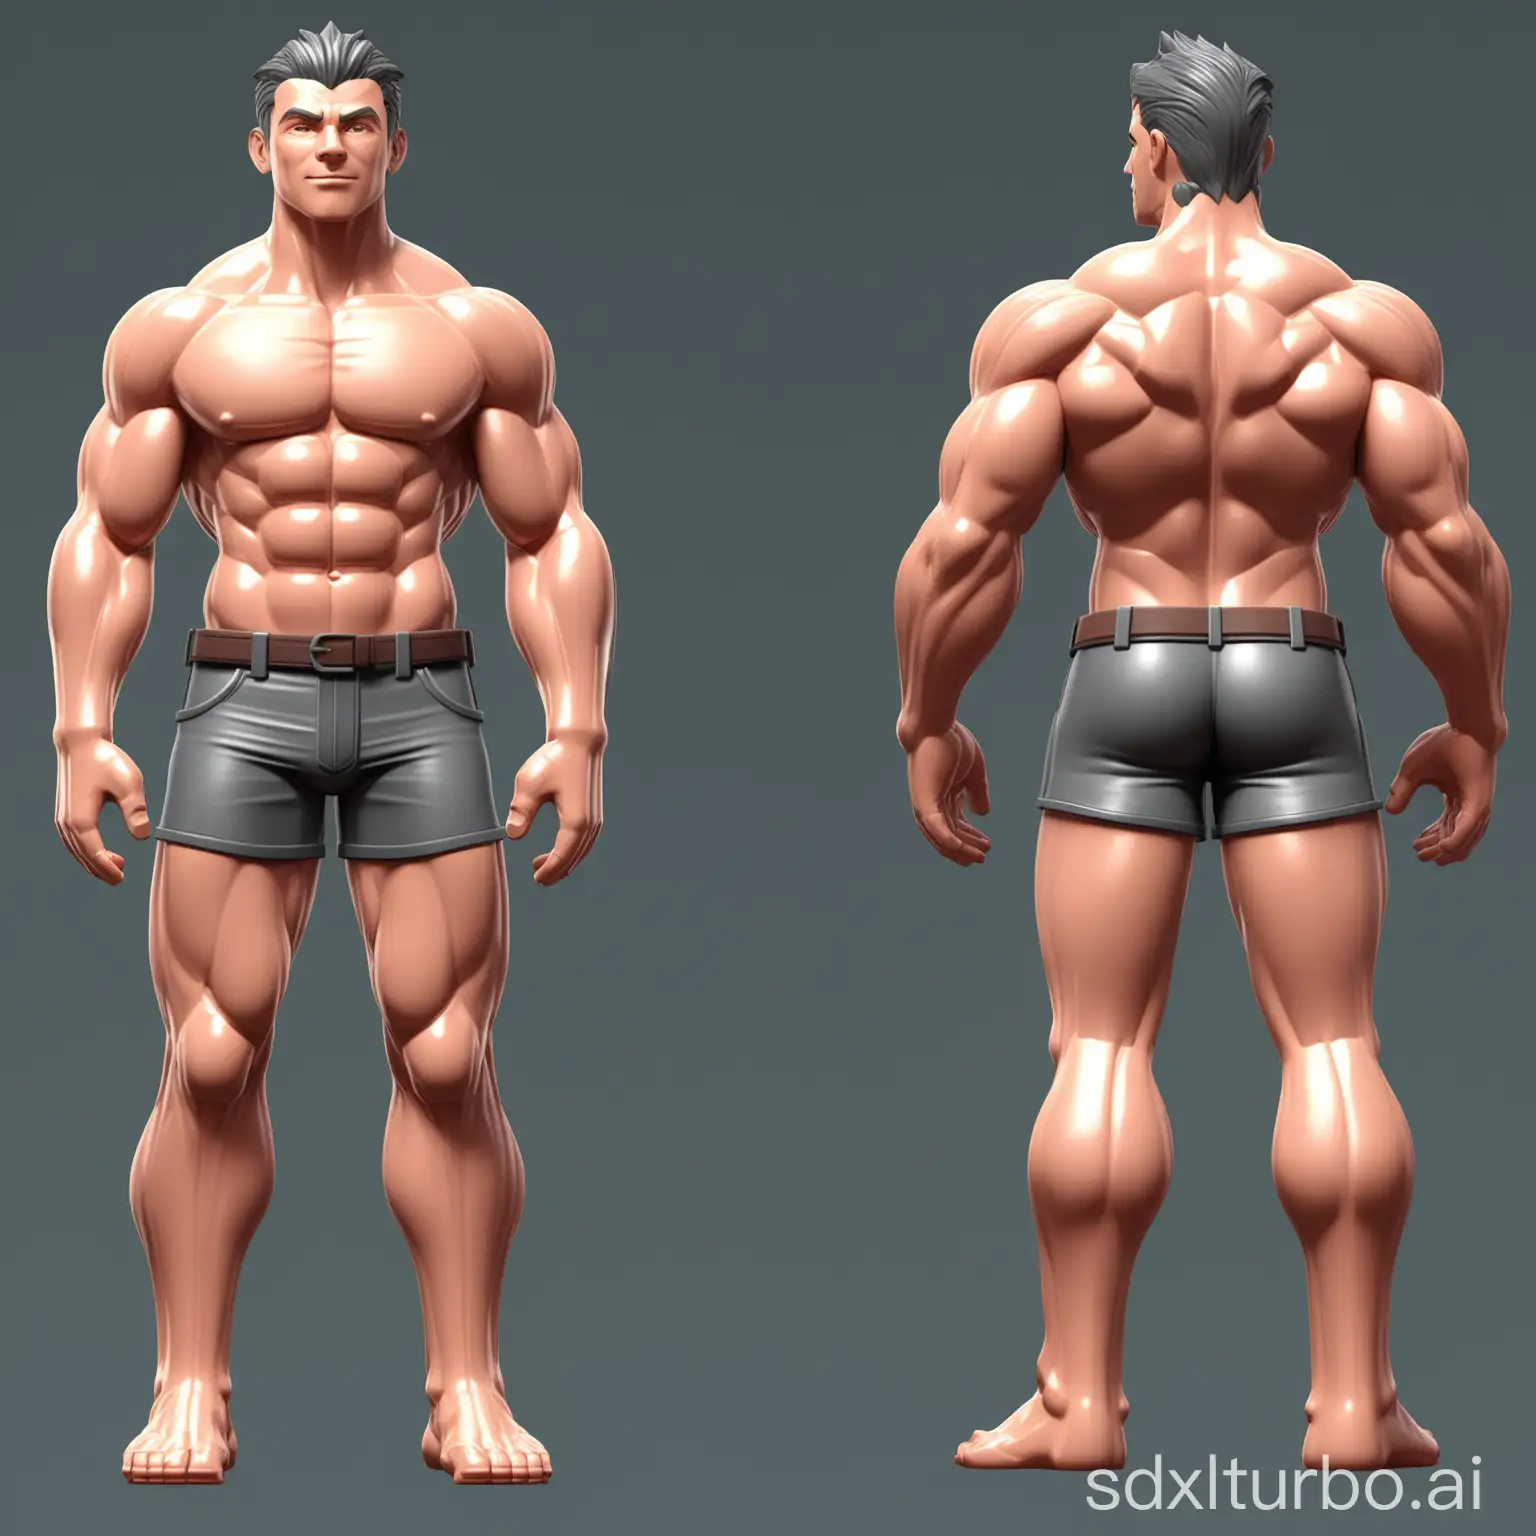 character sheet for 3d modelling, front and side view, side by side, a-pose, 2 views of the same character in orthographic, stylized muscular male